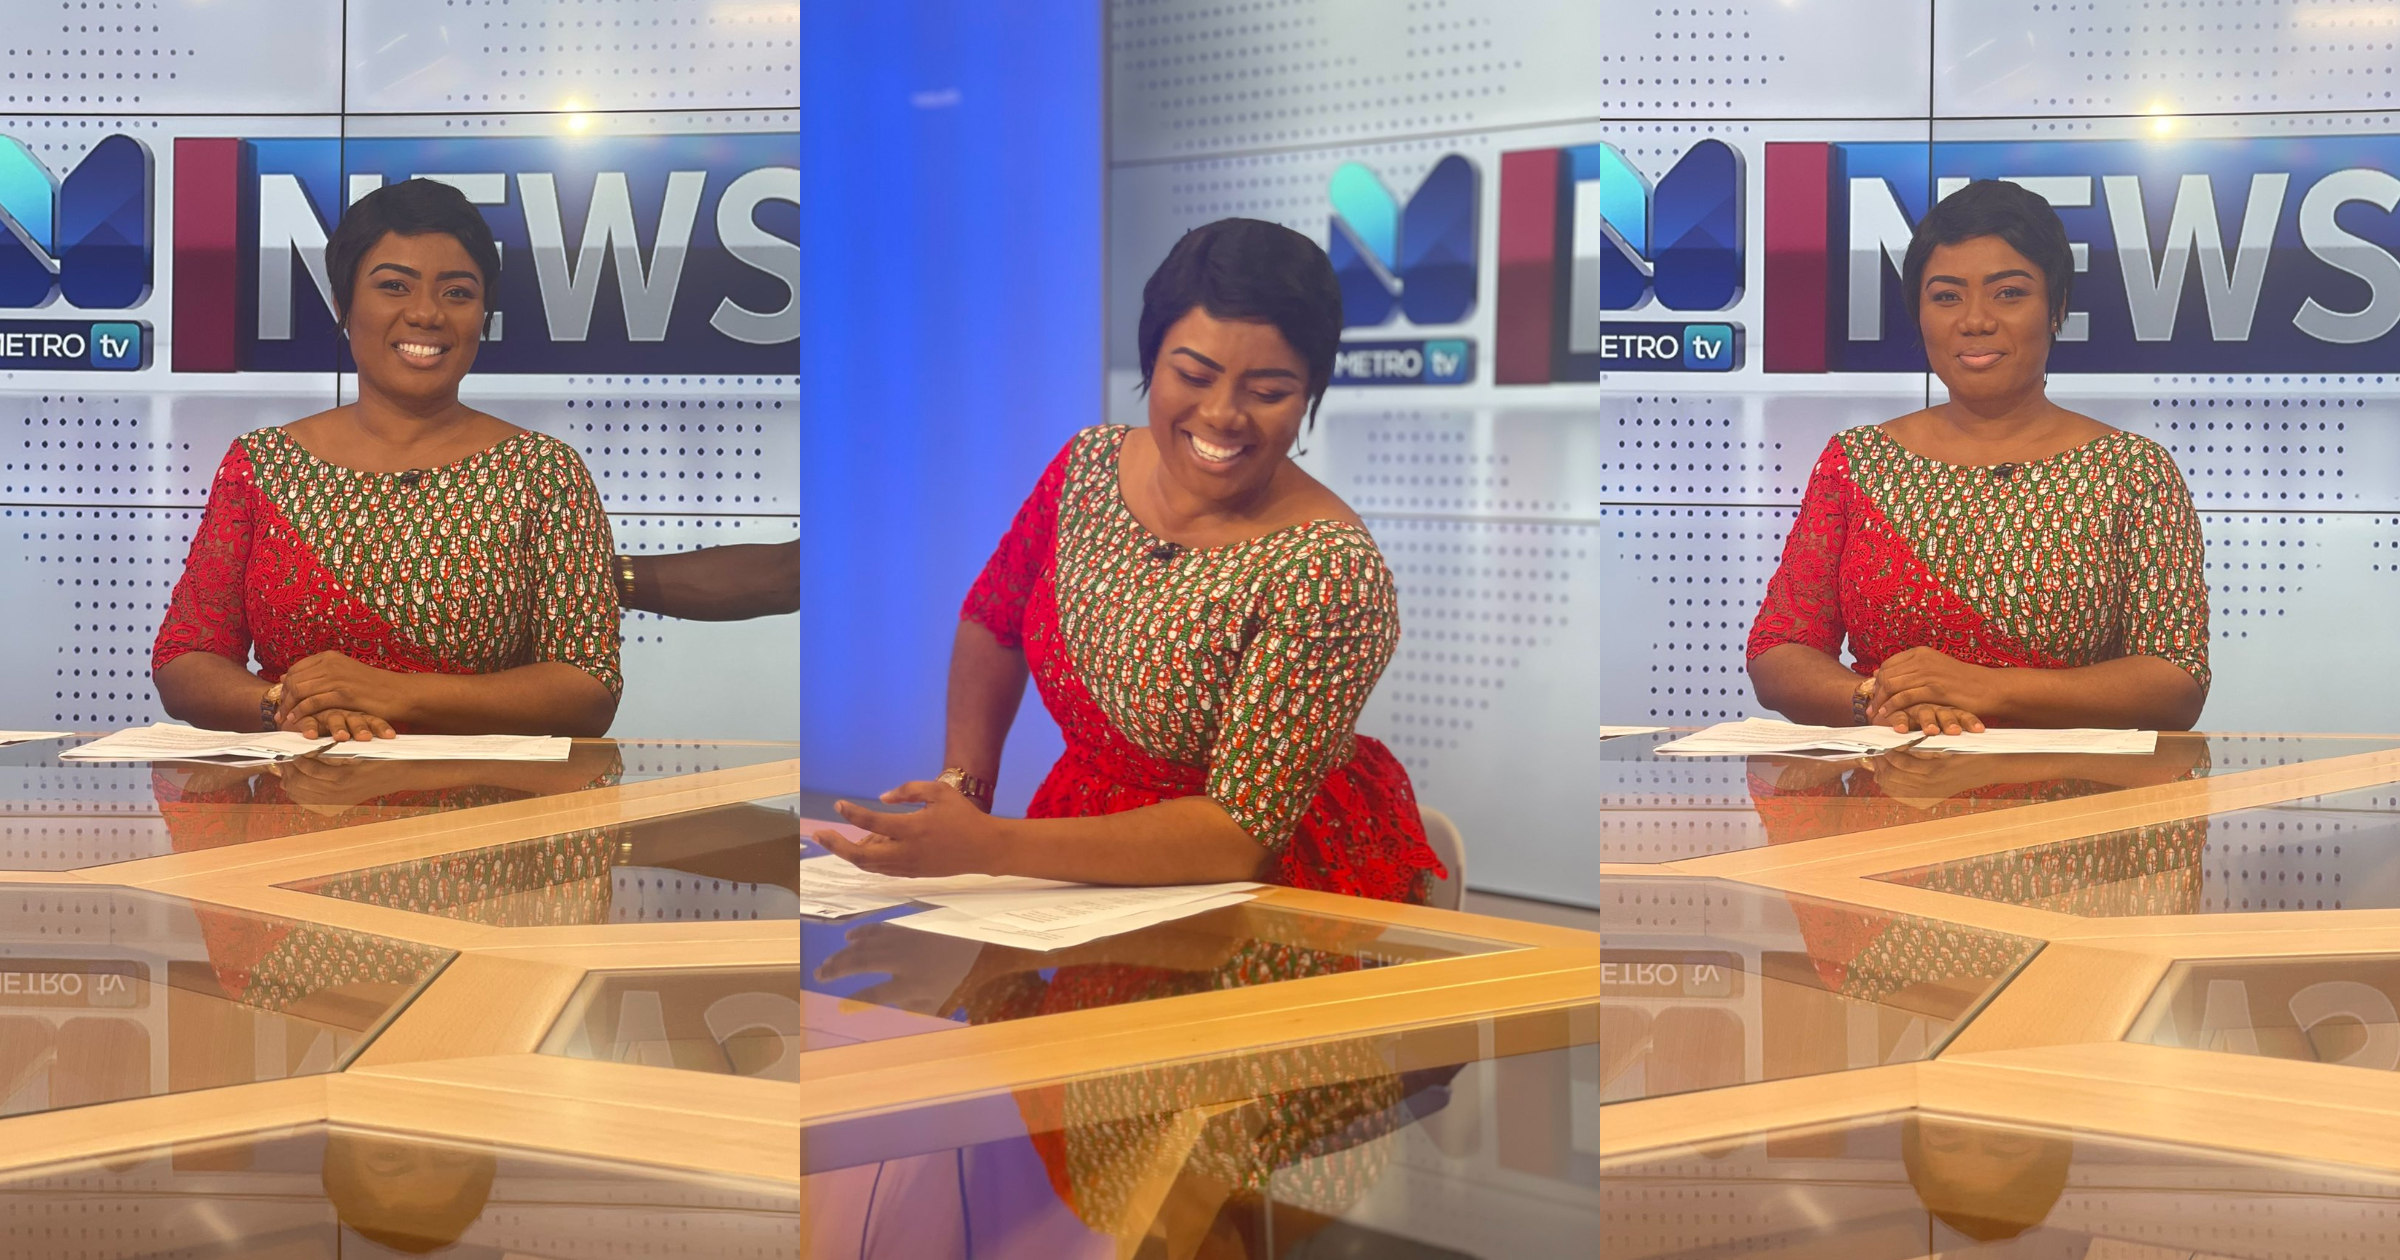 What was meant to break me elevated me; Metro TV's Bridget Otoo shares testimony in new video